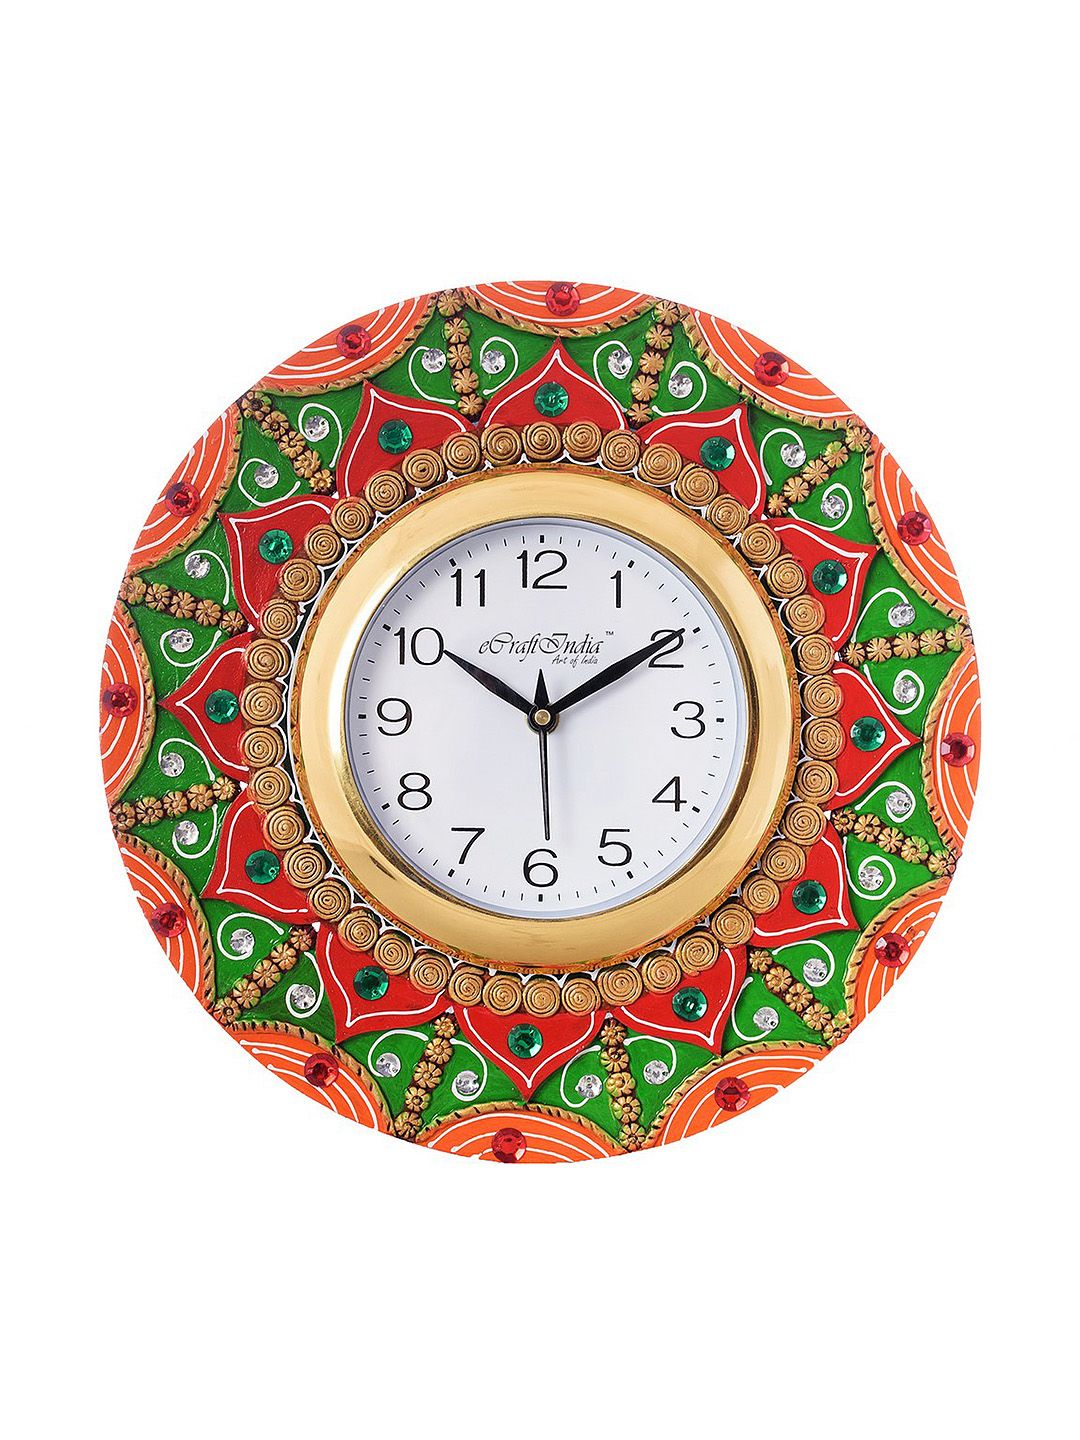 ecraftIndia White Dial Wooden 30.734 cm Handcrafted Wall Clock Price in India